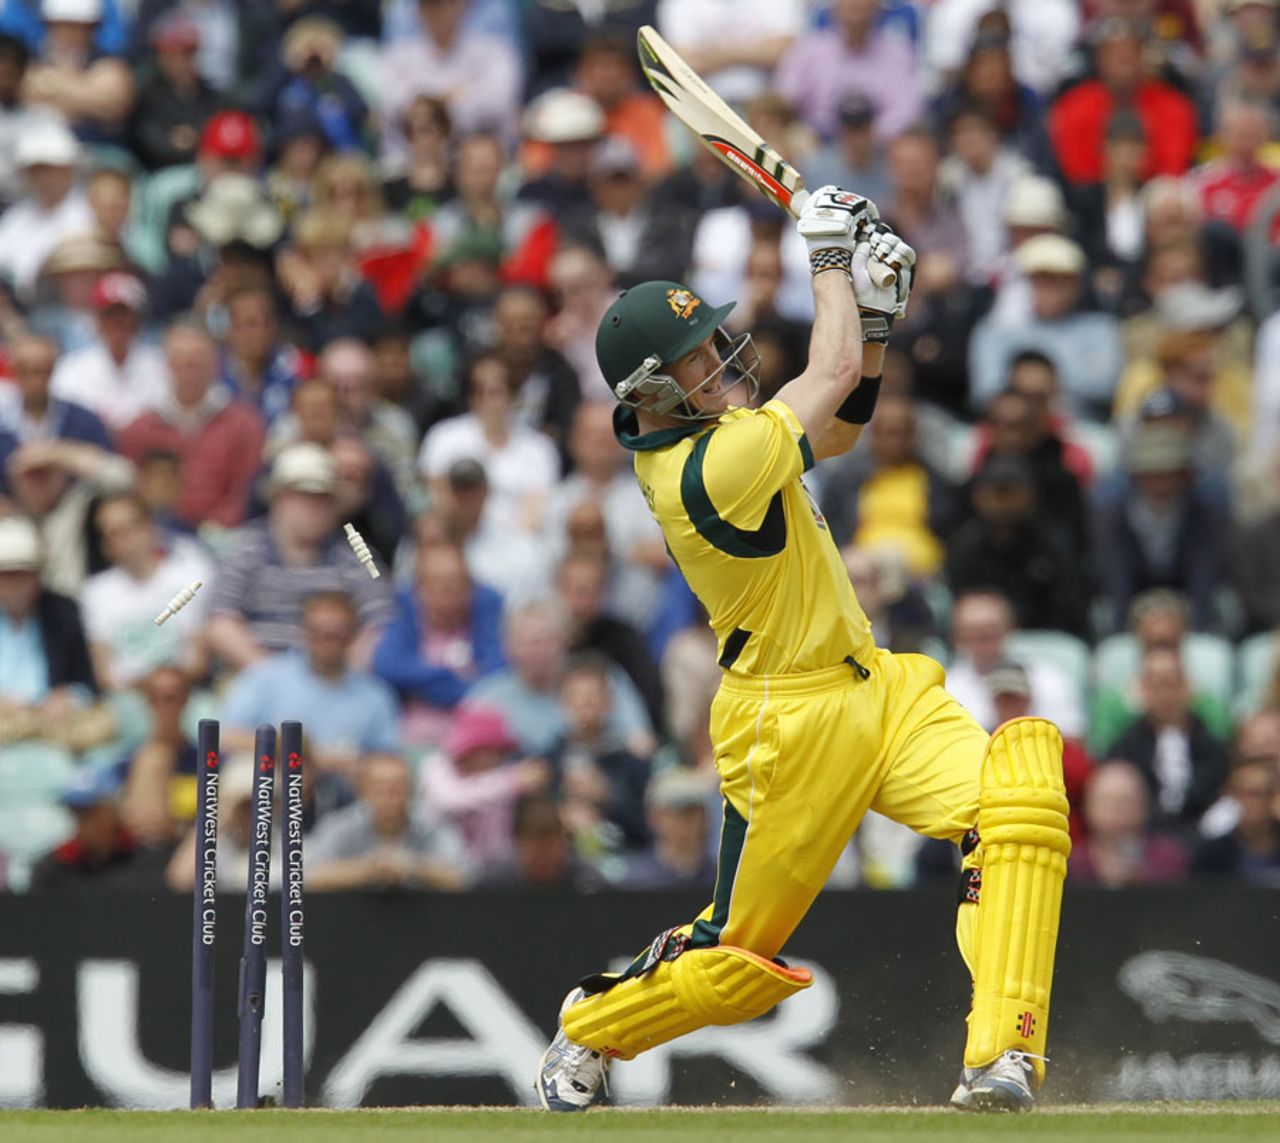 George Bailey was bowled after making 65, England v Australia, 2nd ODI, The Oval, July 1, 2012